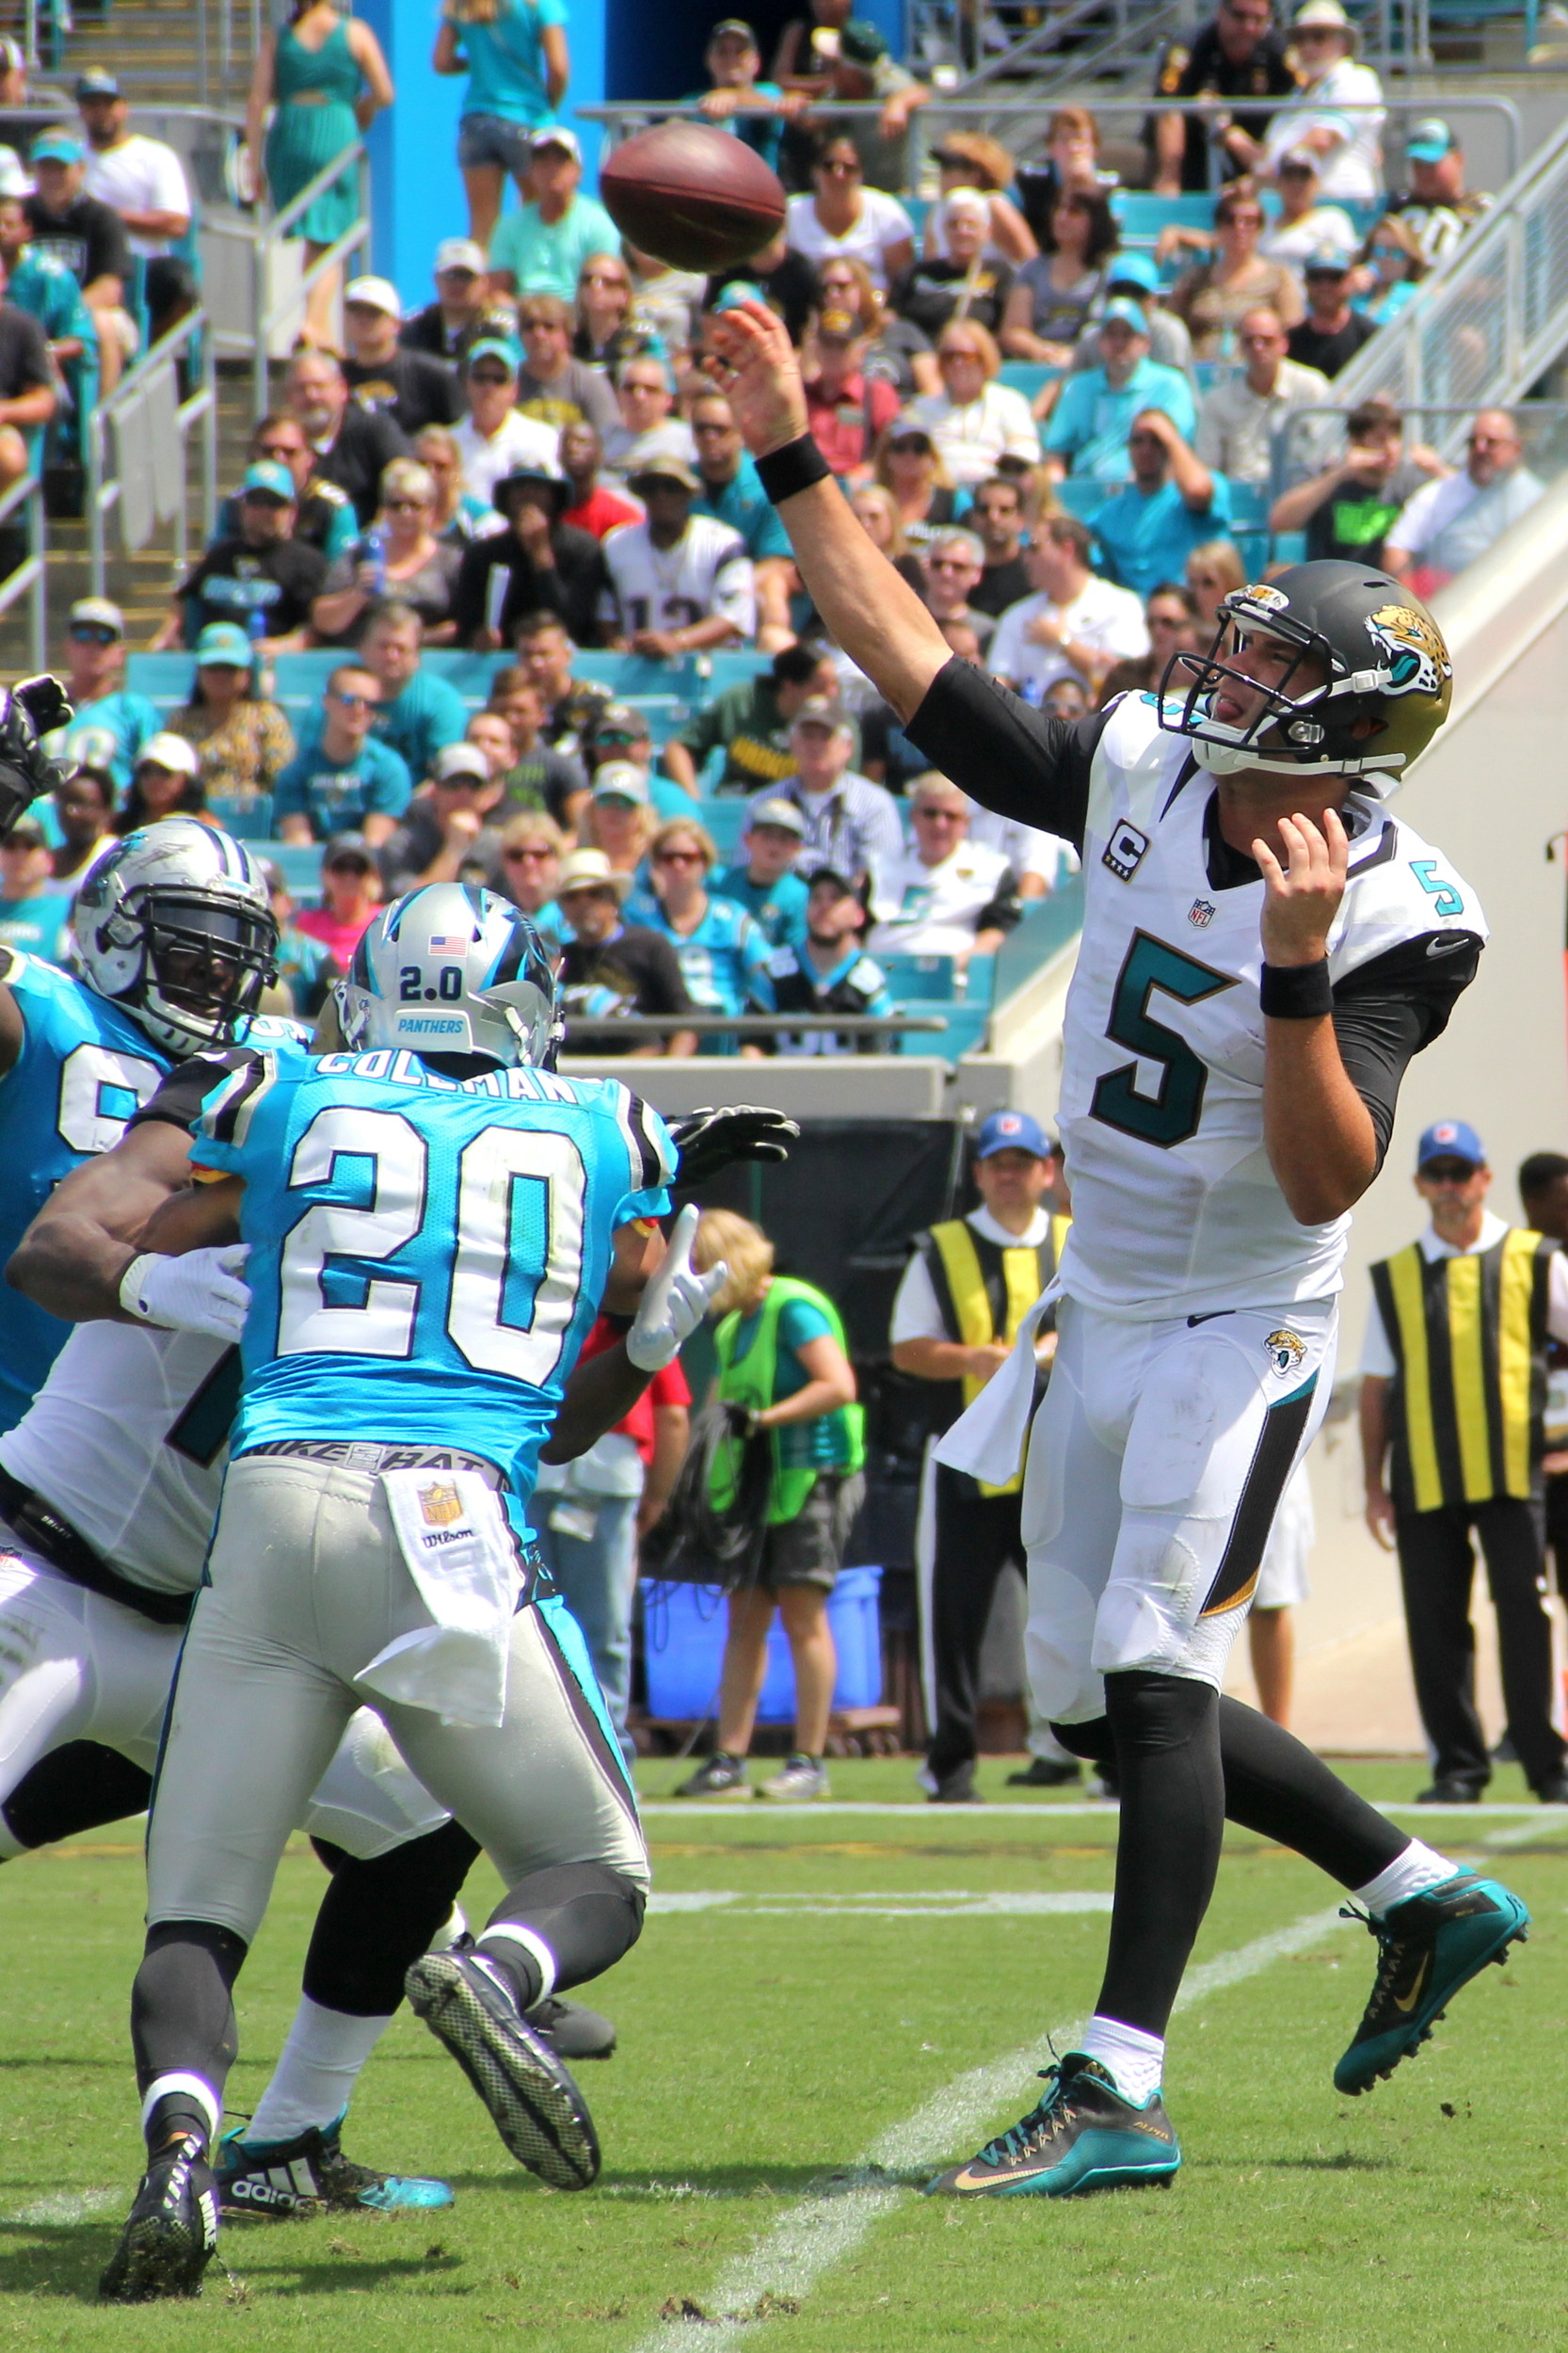 Jacksonville QB Blake Bortles was 22 of 40  for 183 yards with one TD and two interceptions.